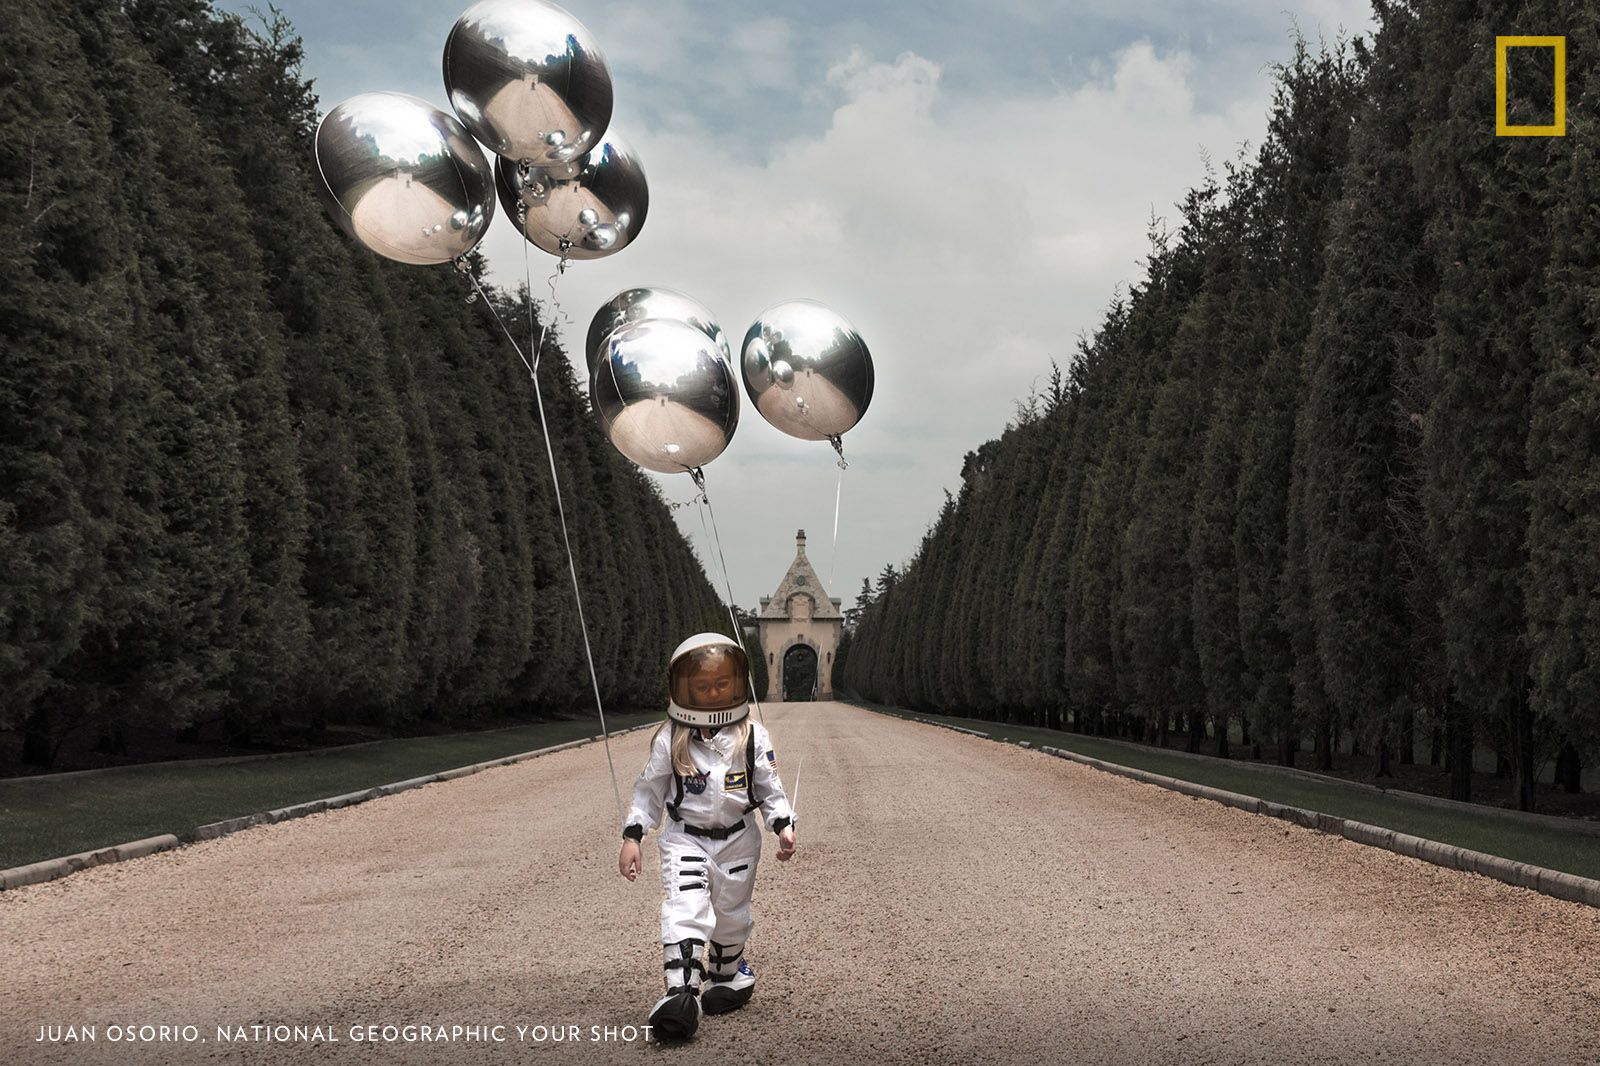 My daughter wants to fly to the moon. I wanted to create a surreal world with the balloons in which you have several angles of view, like having several cameras showing the landscape and Sophia the astronaut. Image by Juan Osorio.